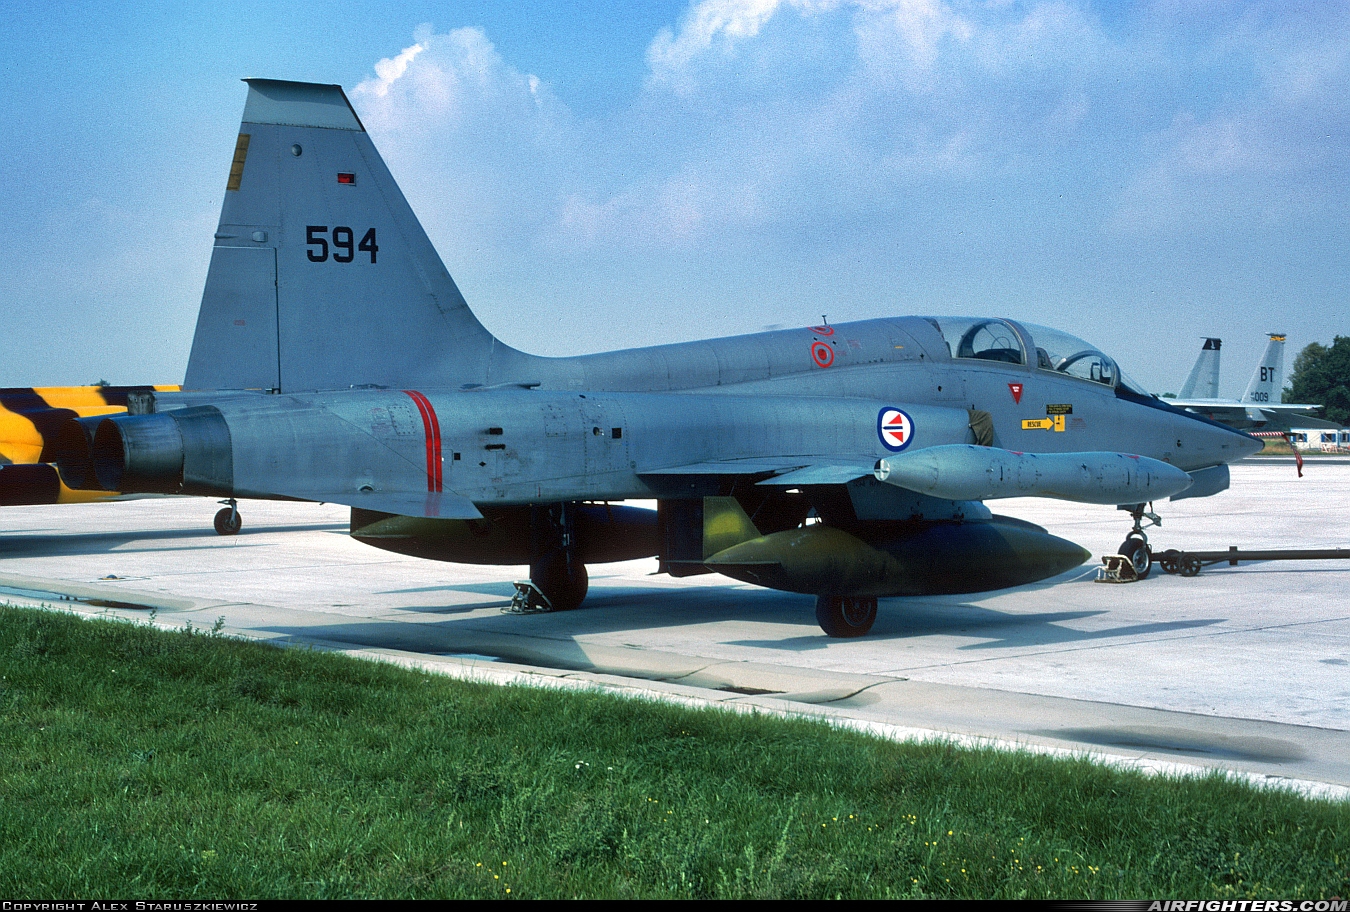 Norway - Air Force Northrop F-5B Freedom Fighter 594 at Gutersloh (GUT / ETUO), Germany